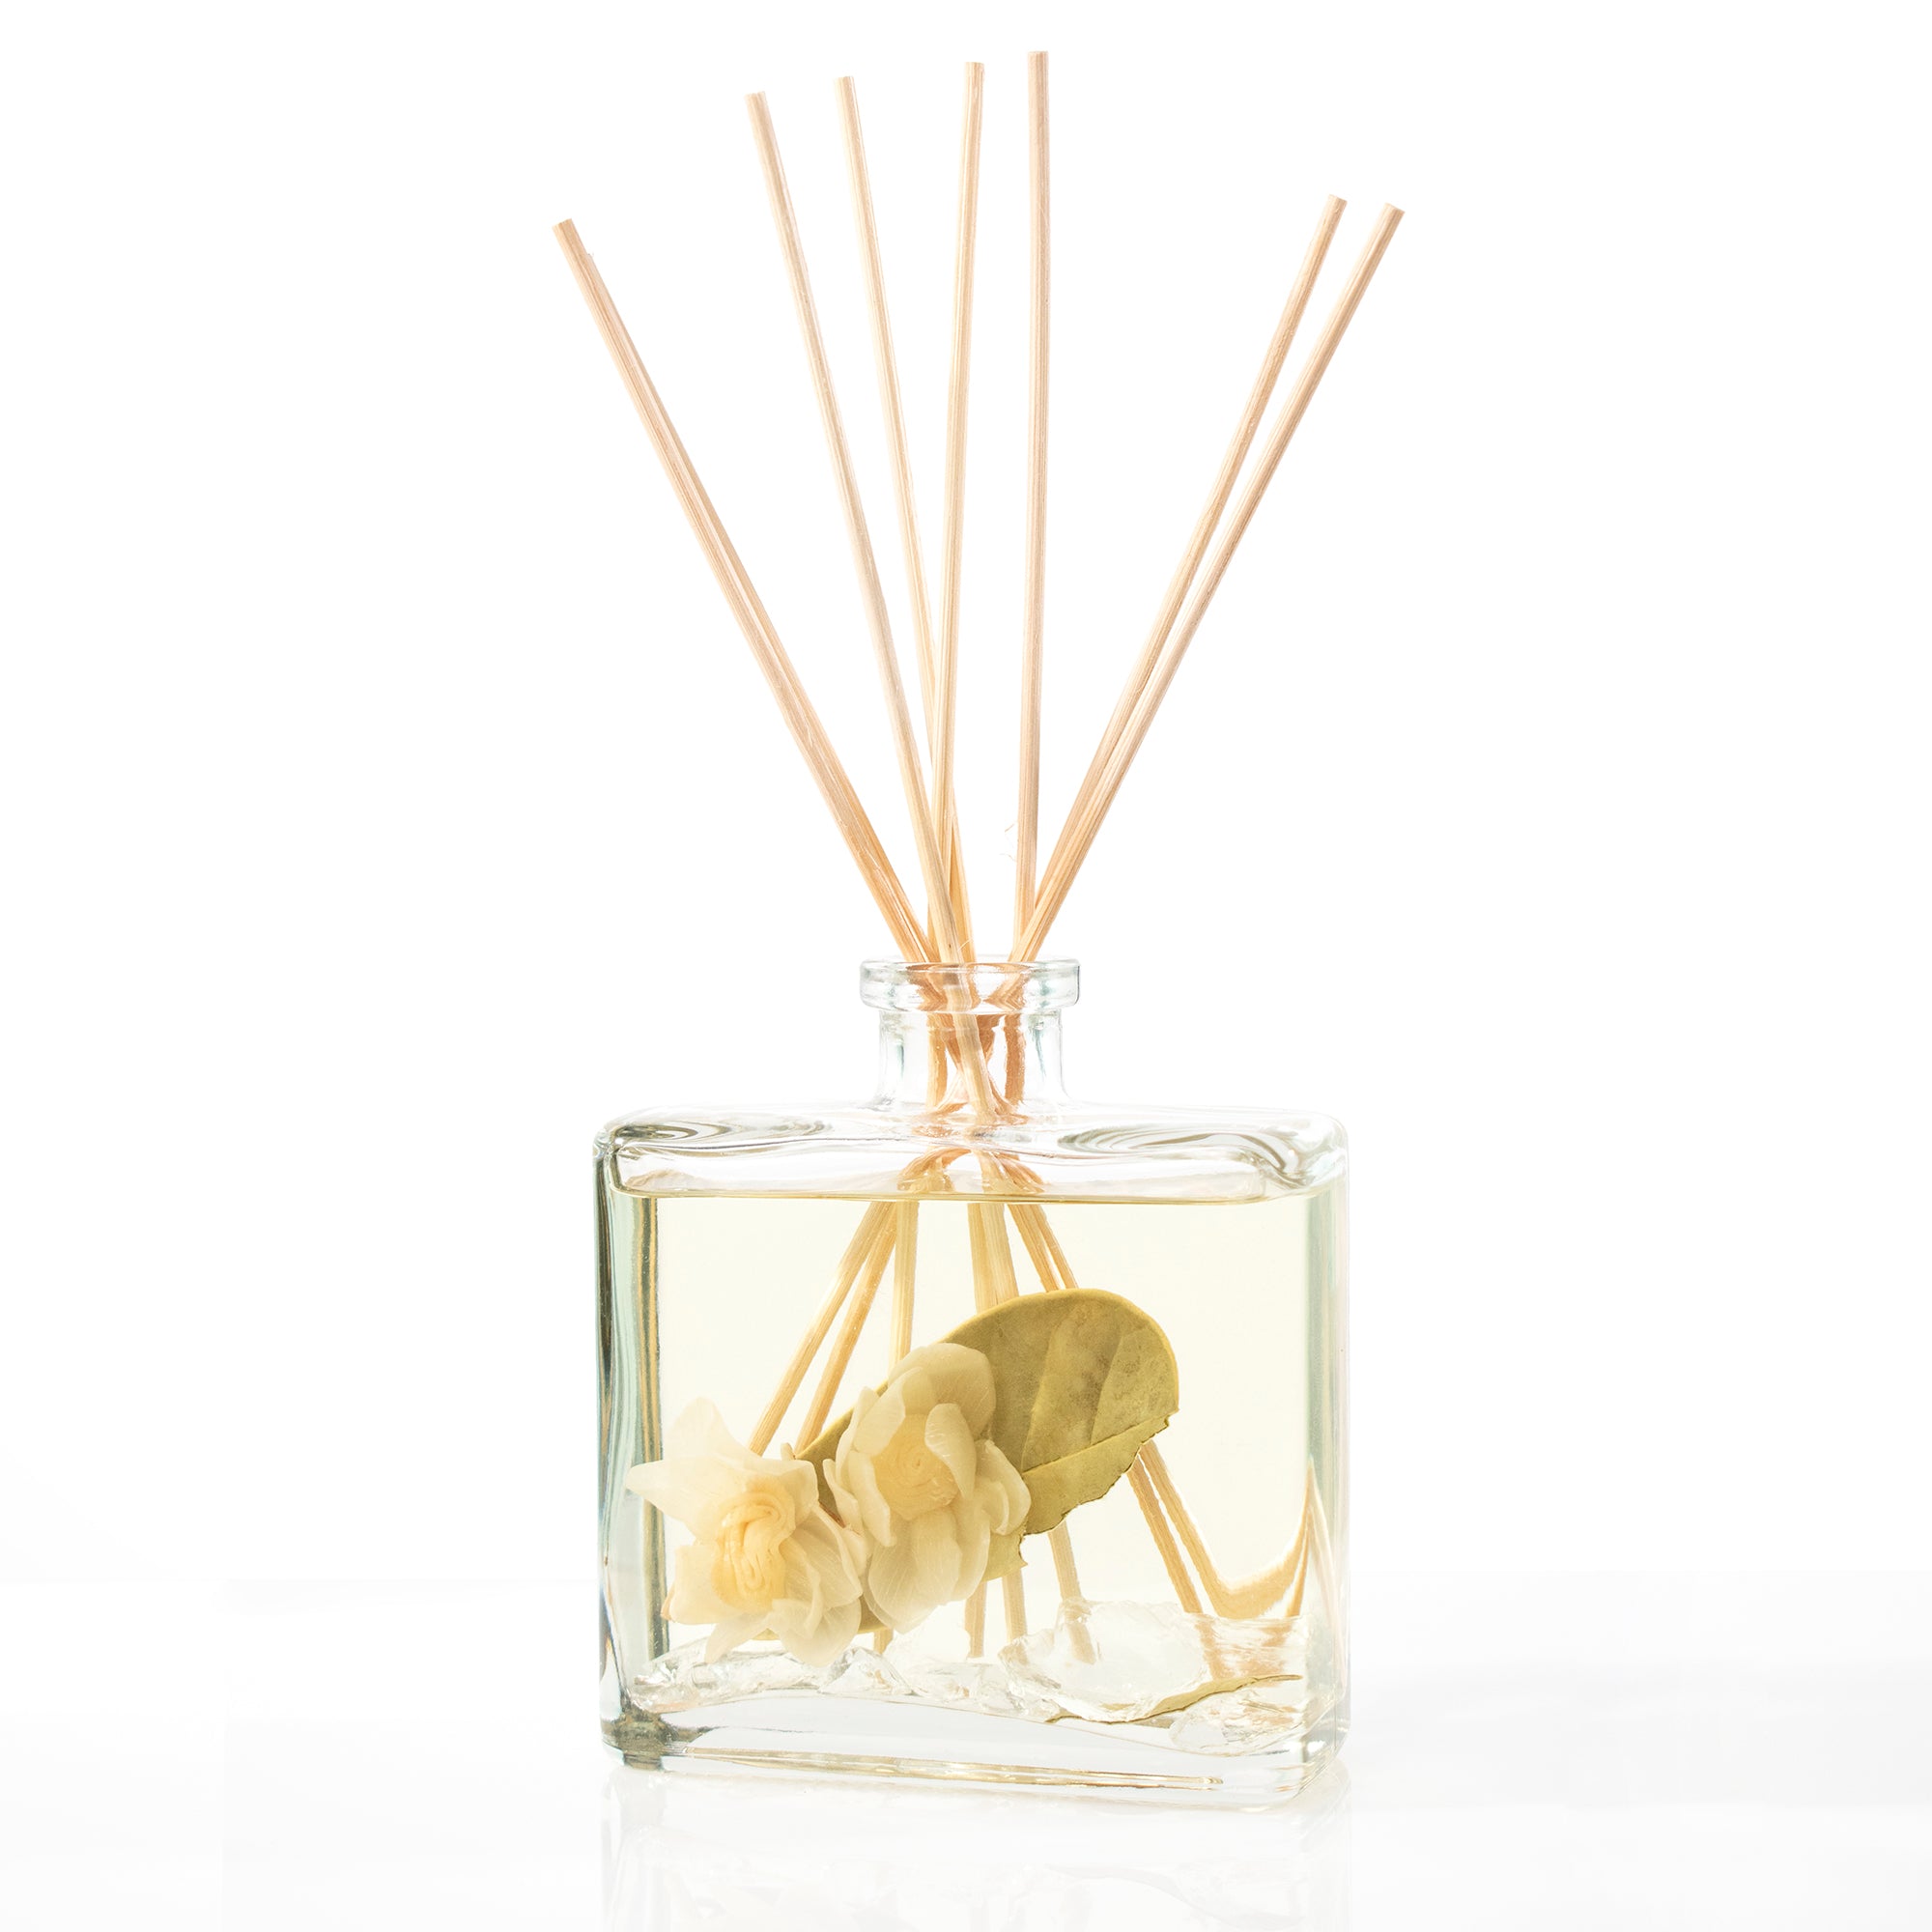 Gardens of Bali Reed Diffuser